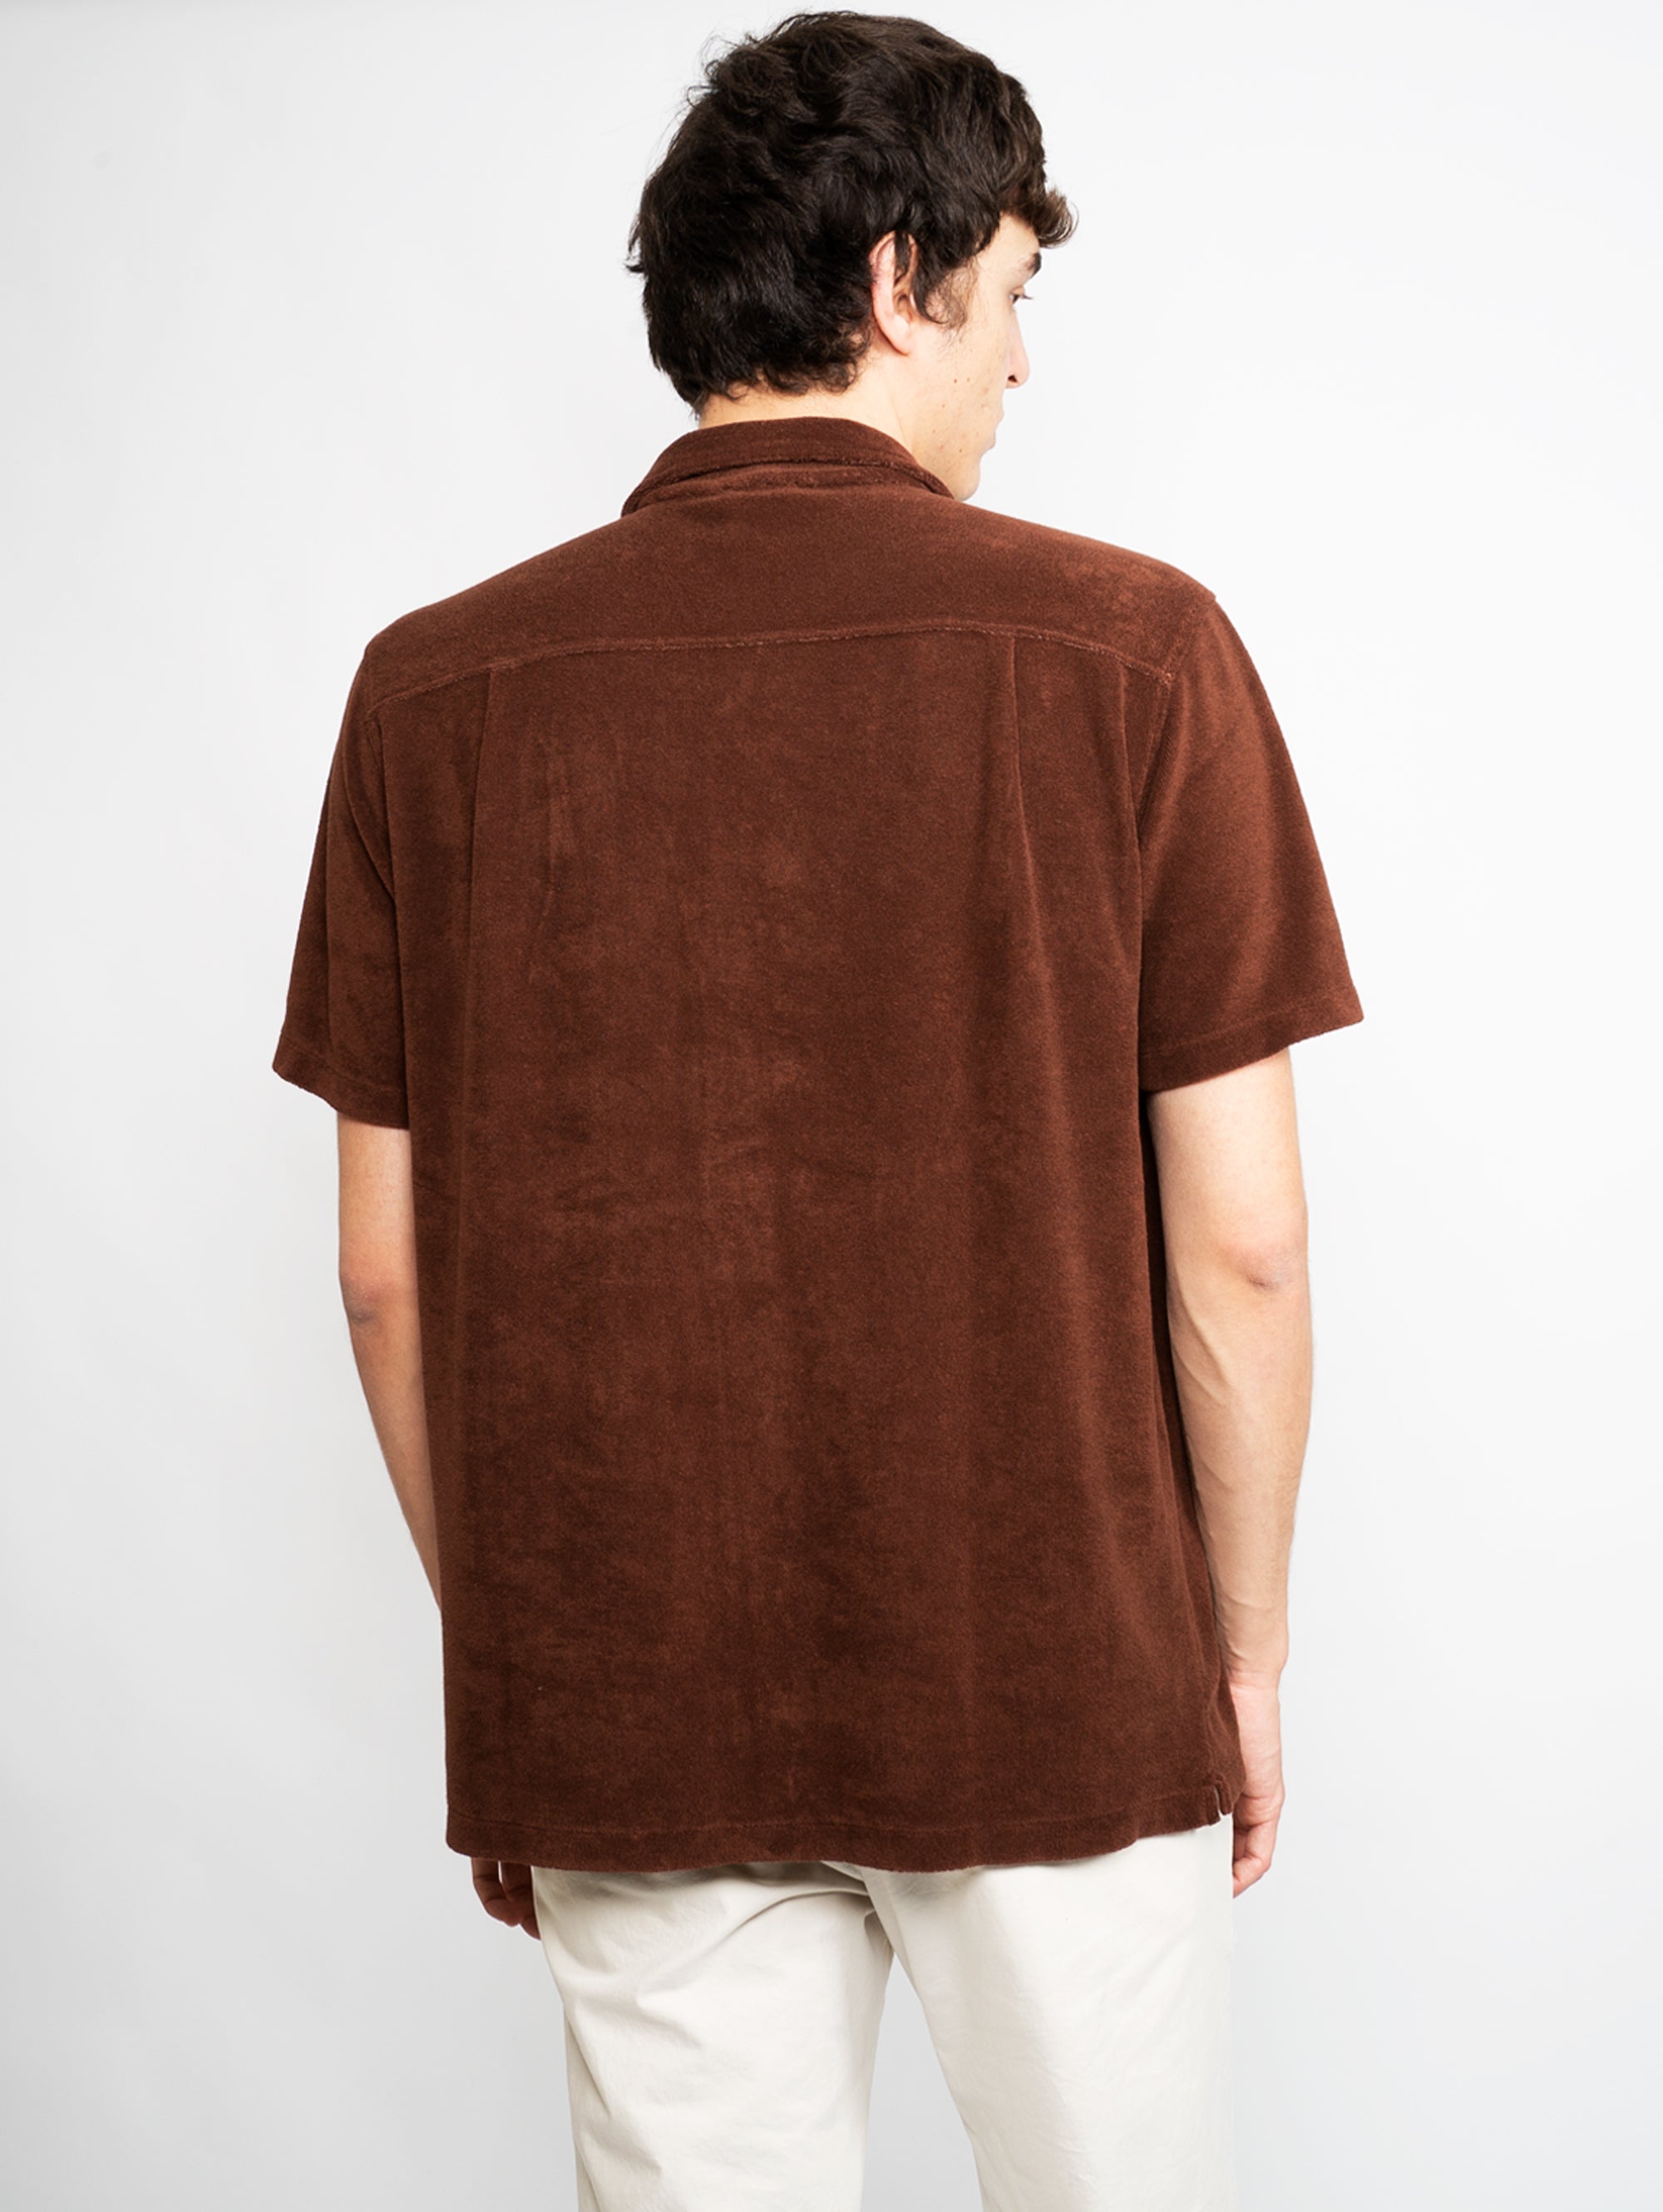 Short Sleeves Shirt in Brown Terry Cloth